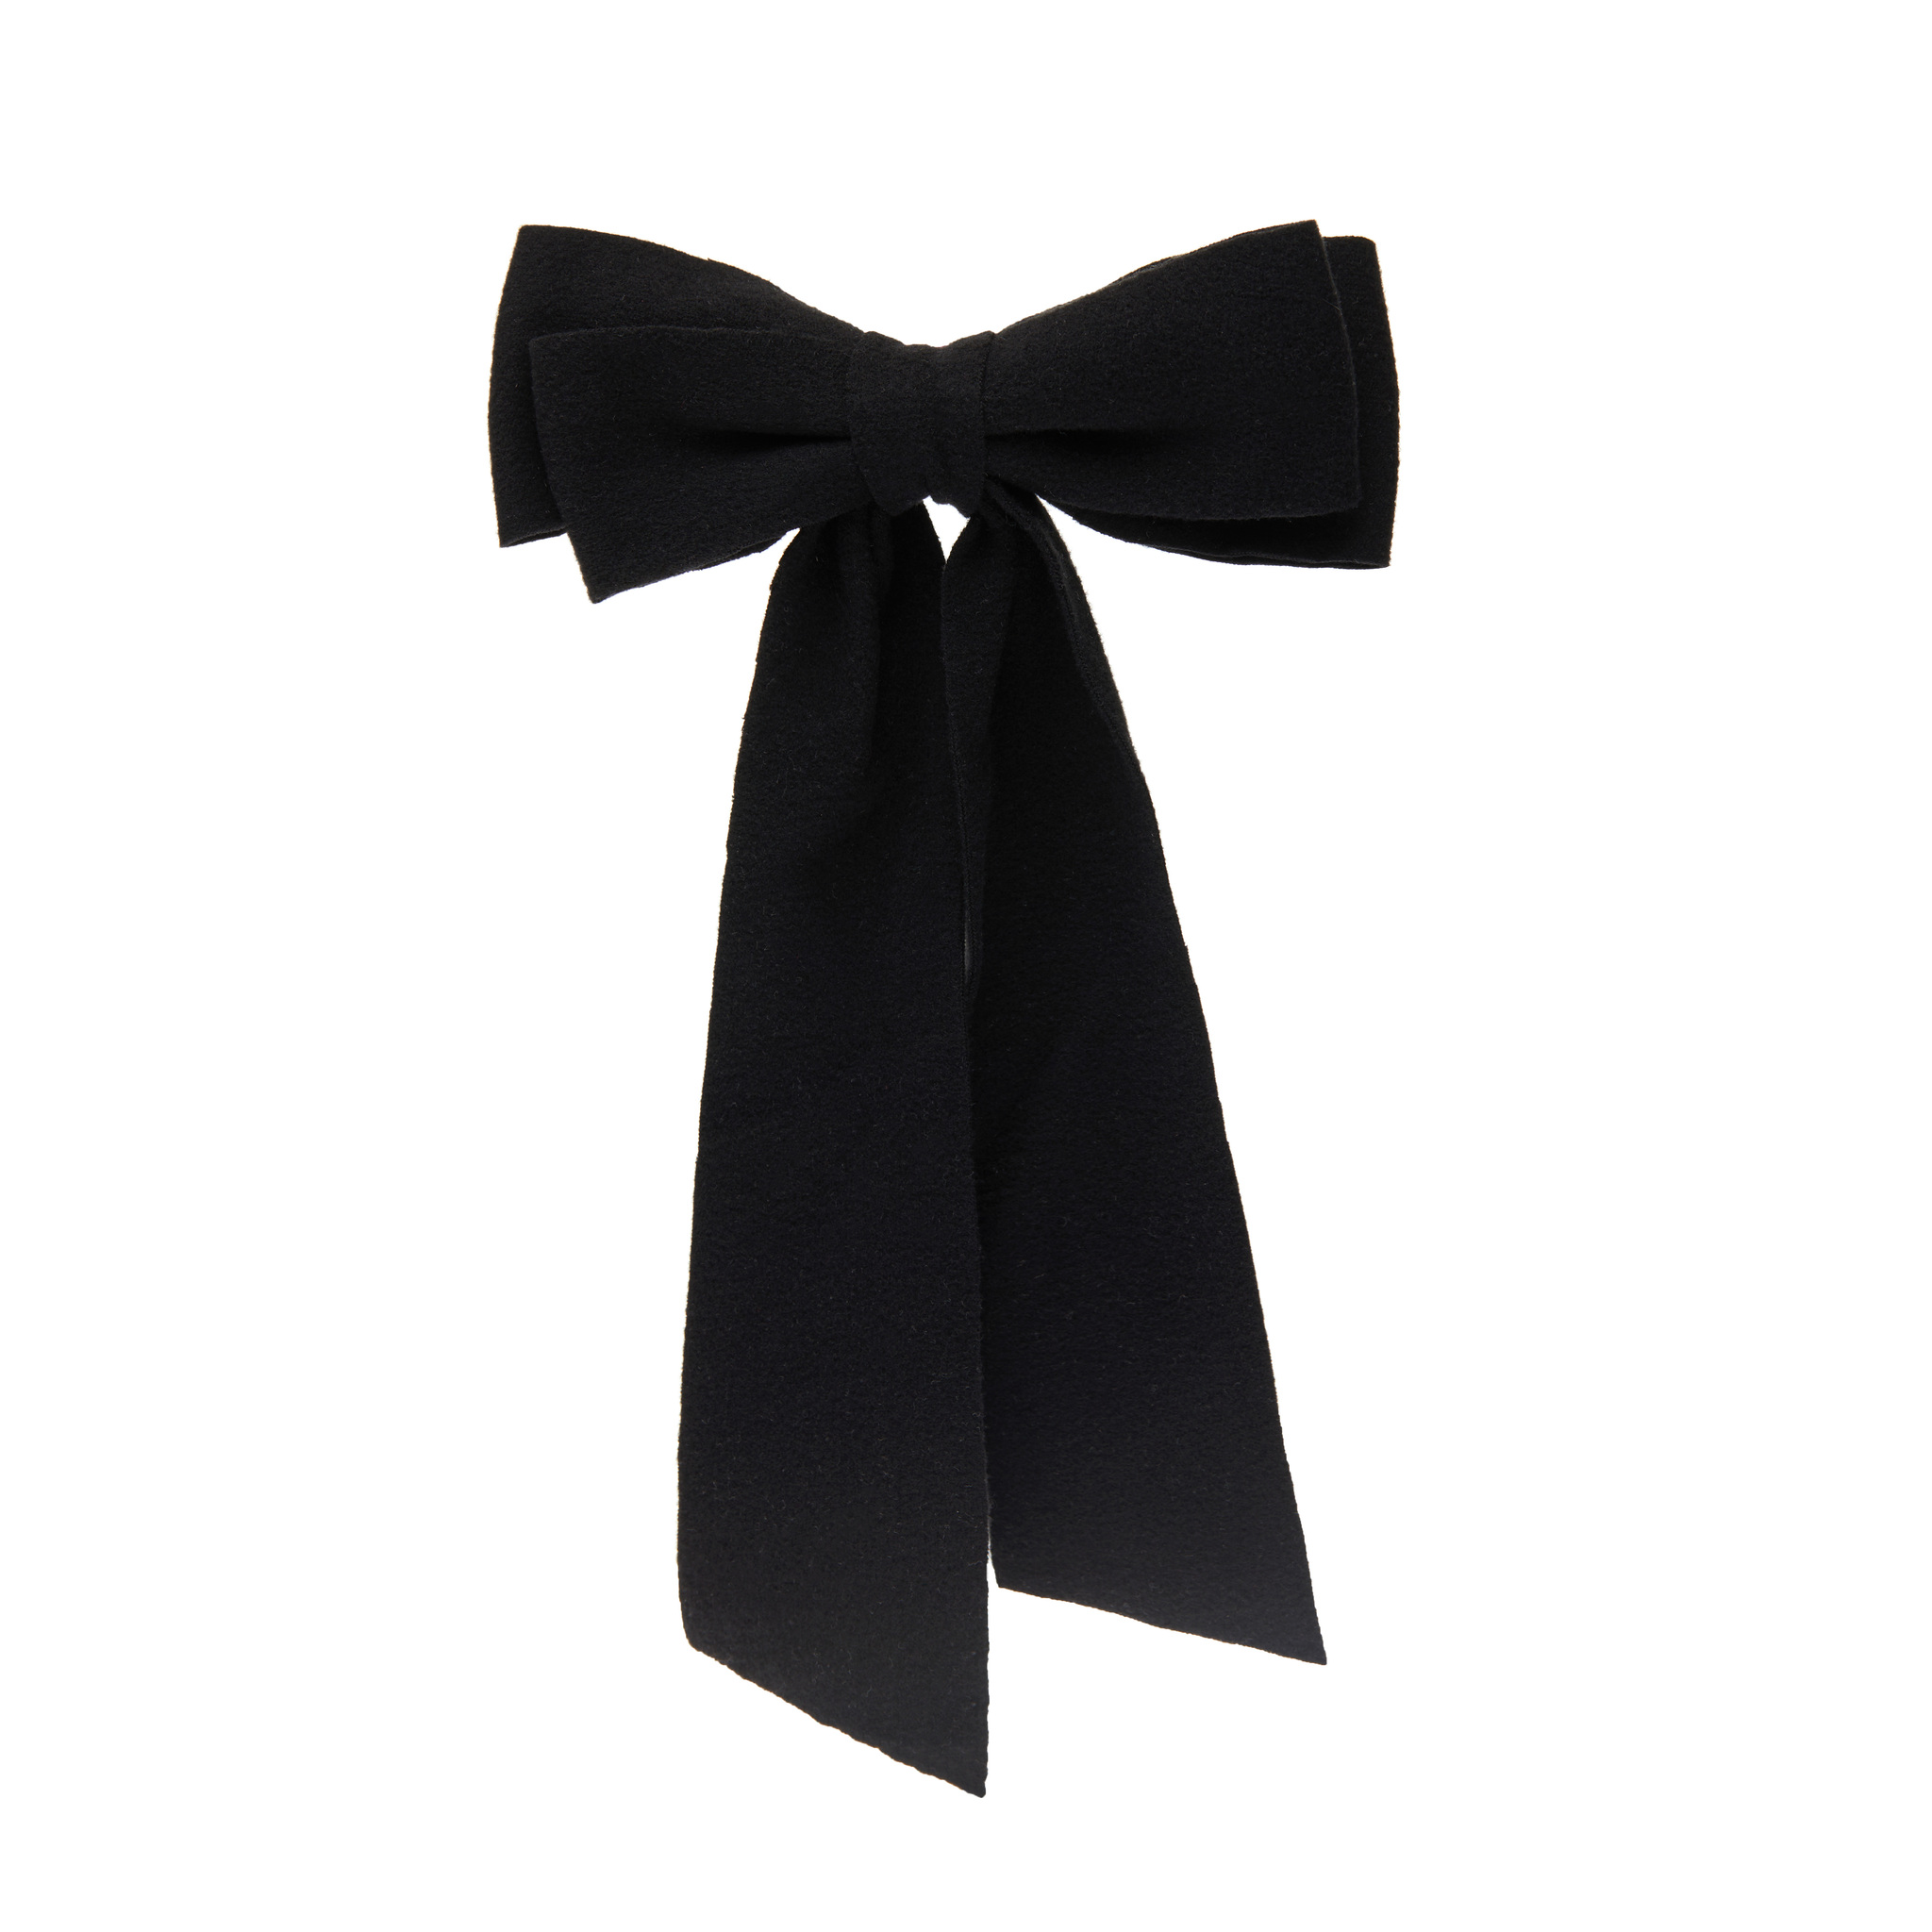 HOLLY JUNE Заколка Ribbon Bow Hair Clip – Black elegant velvet pearl barrettes bow hair clip bow hairpins vintage women girls black wine red bow hair clip tie prom accessories